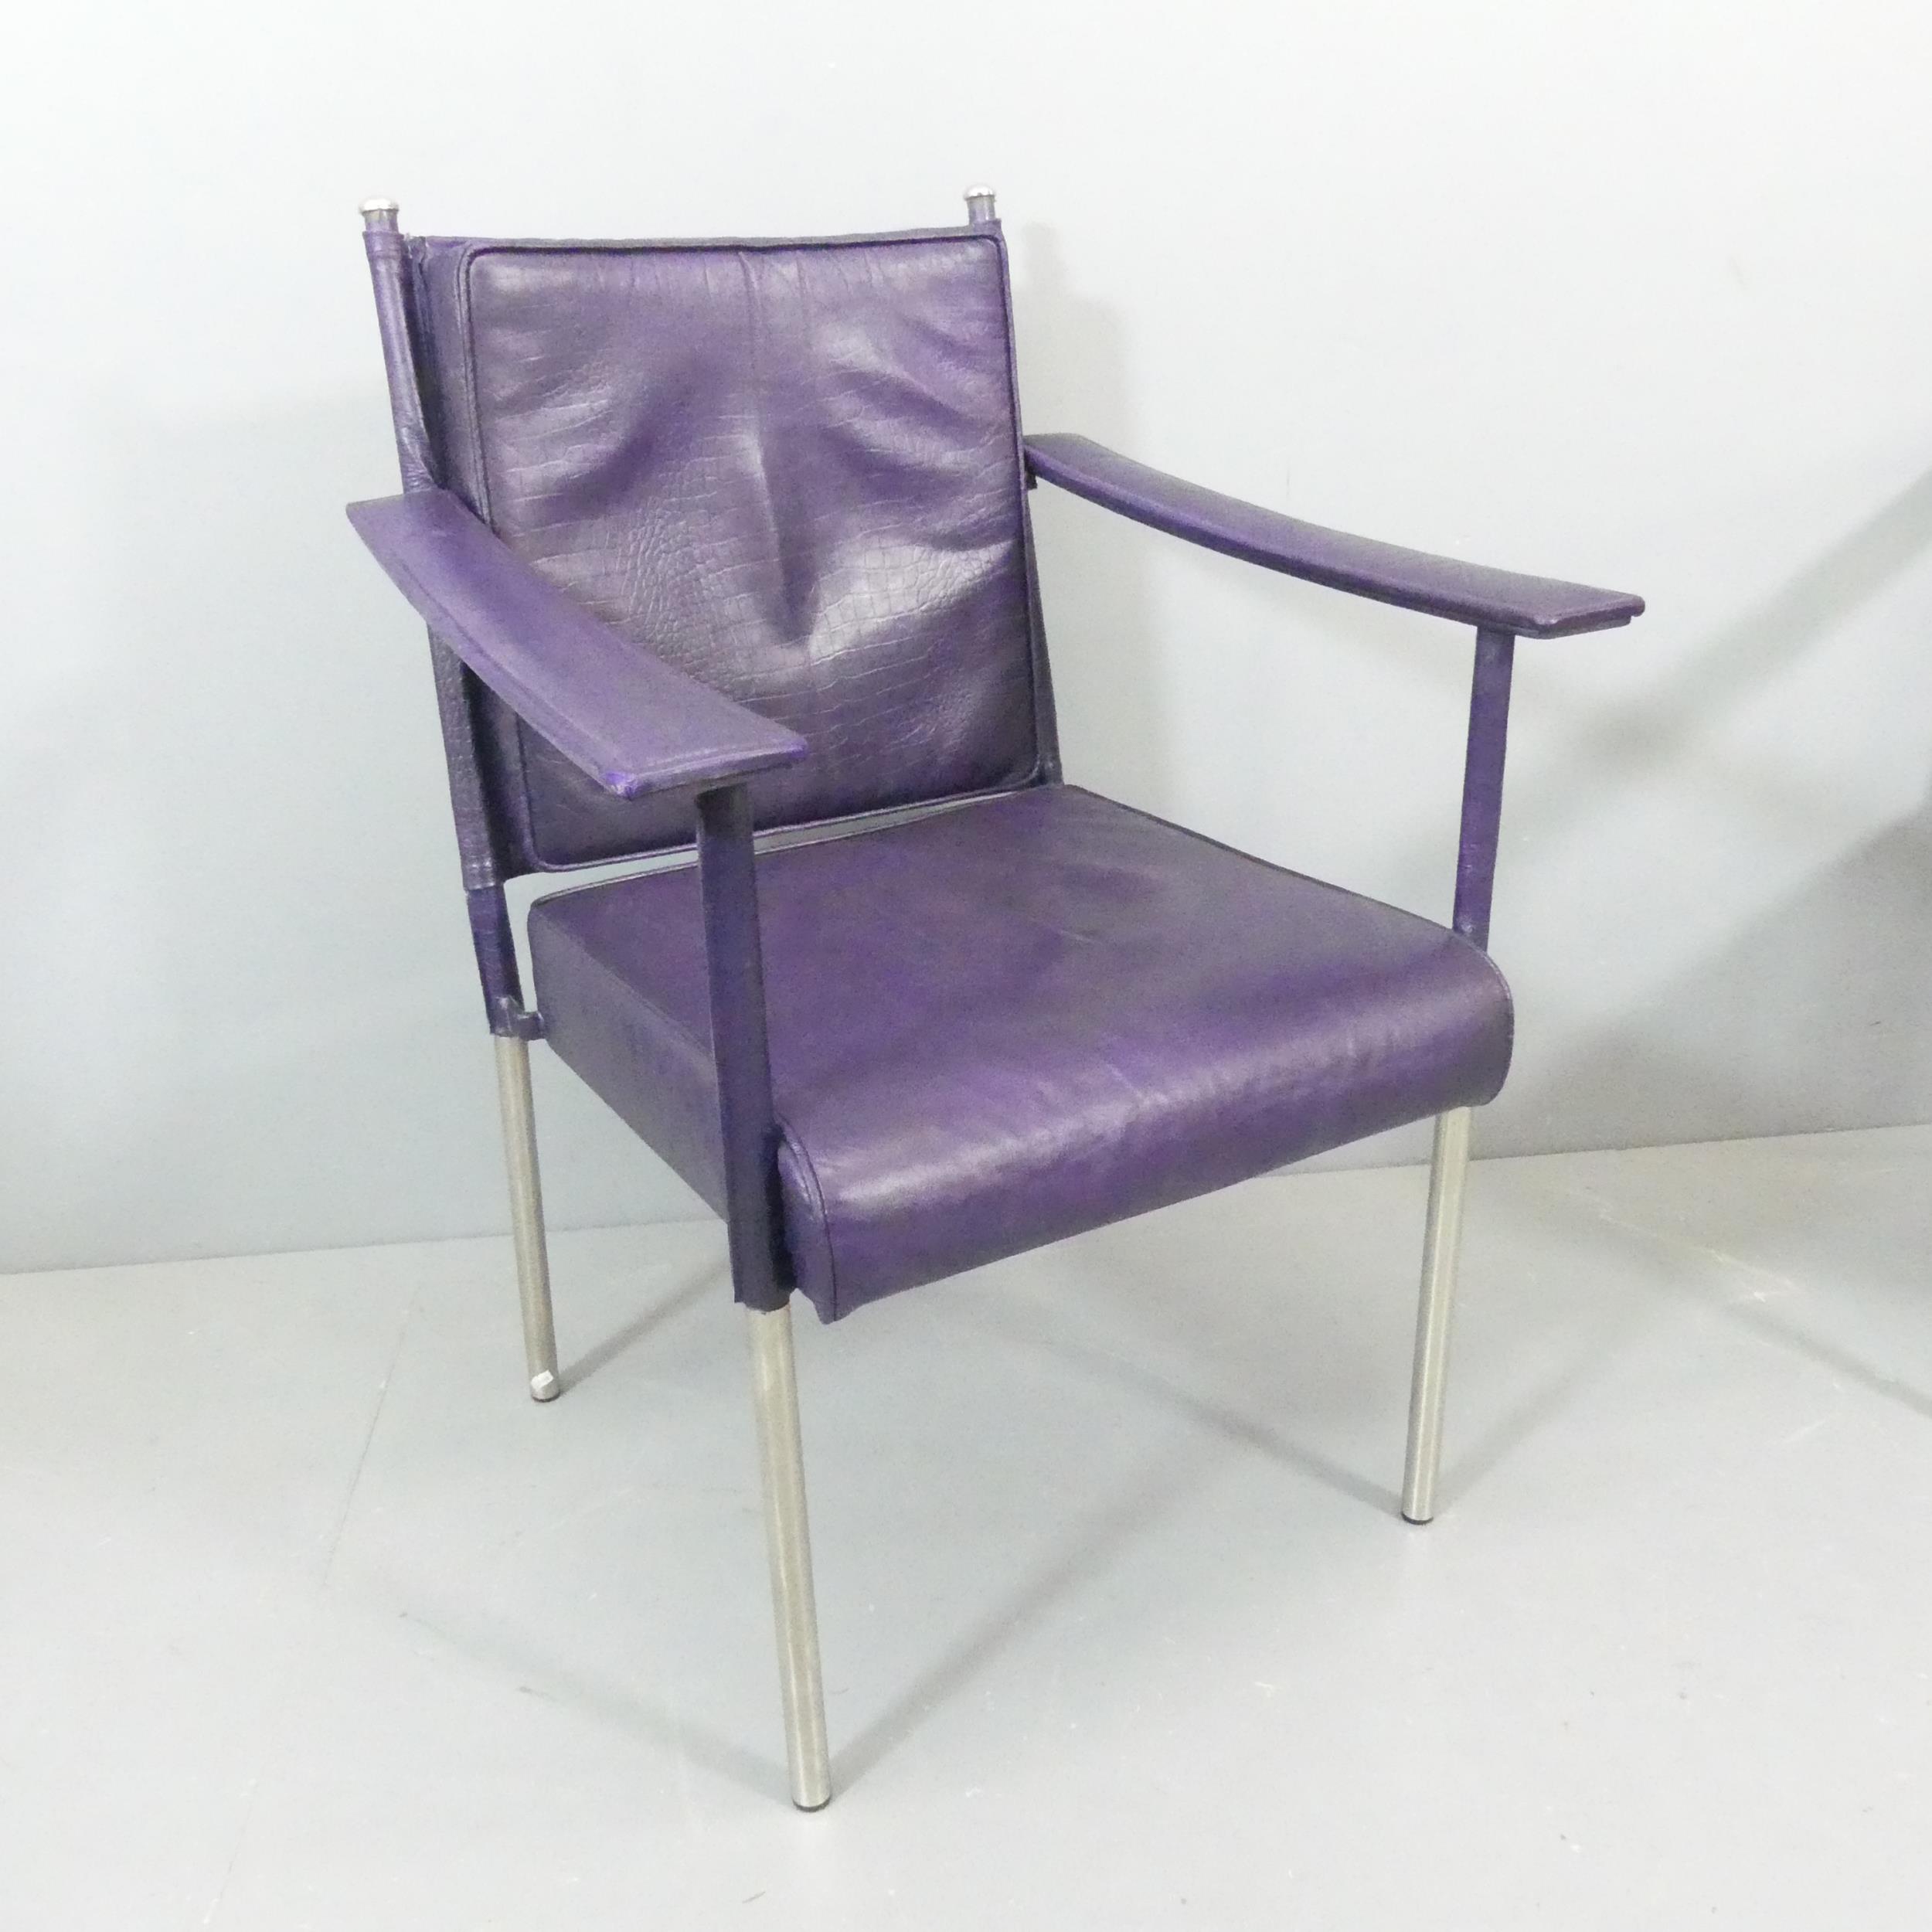 SOANE BRITAIN - a contemporary Crillon leather armchair in the manner of Jacques Adnet , current RRP